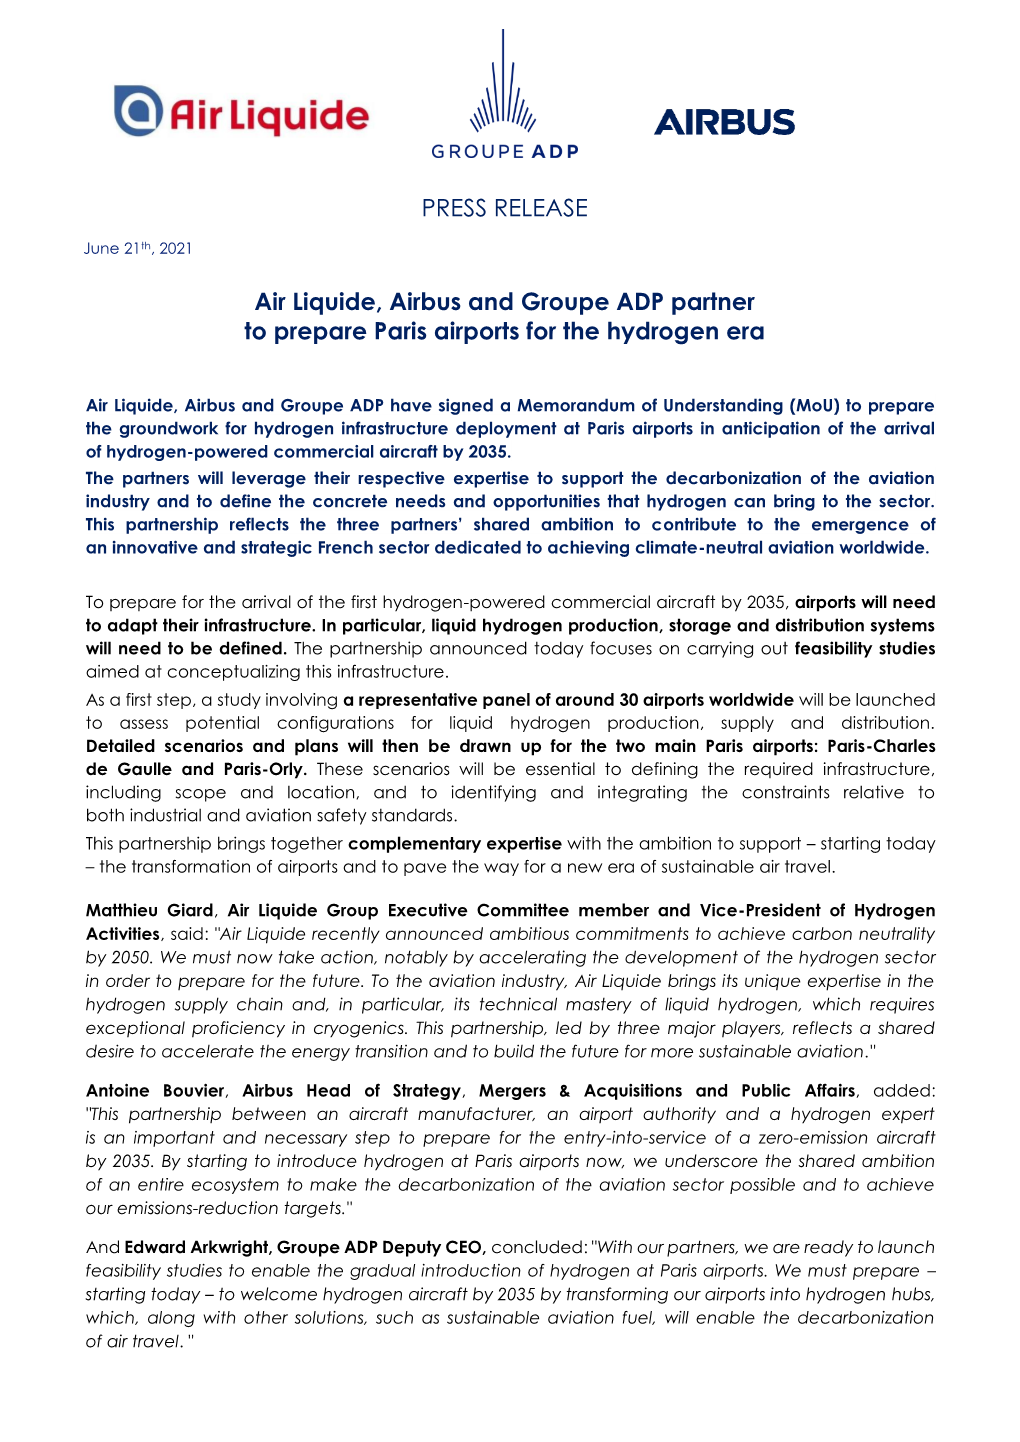 PRESS RELEASE Air Liquide, Airbus and Groupe ADP Partner to Prepare